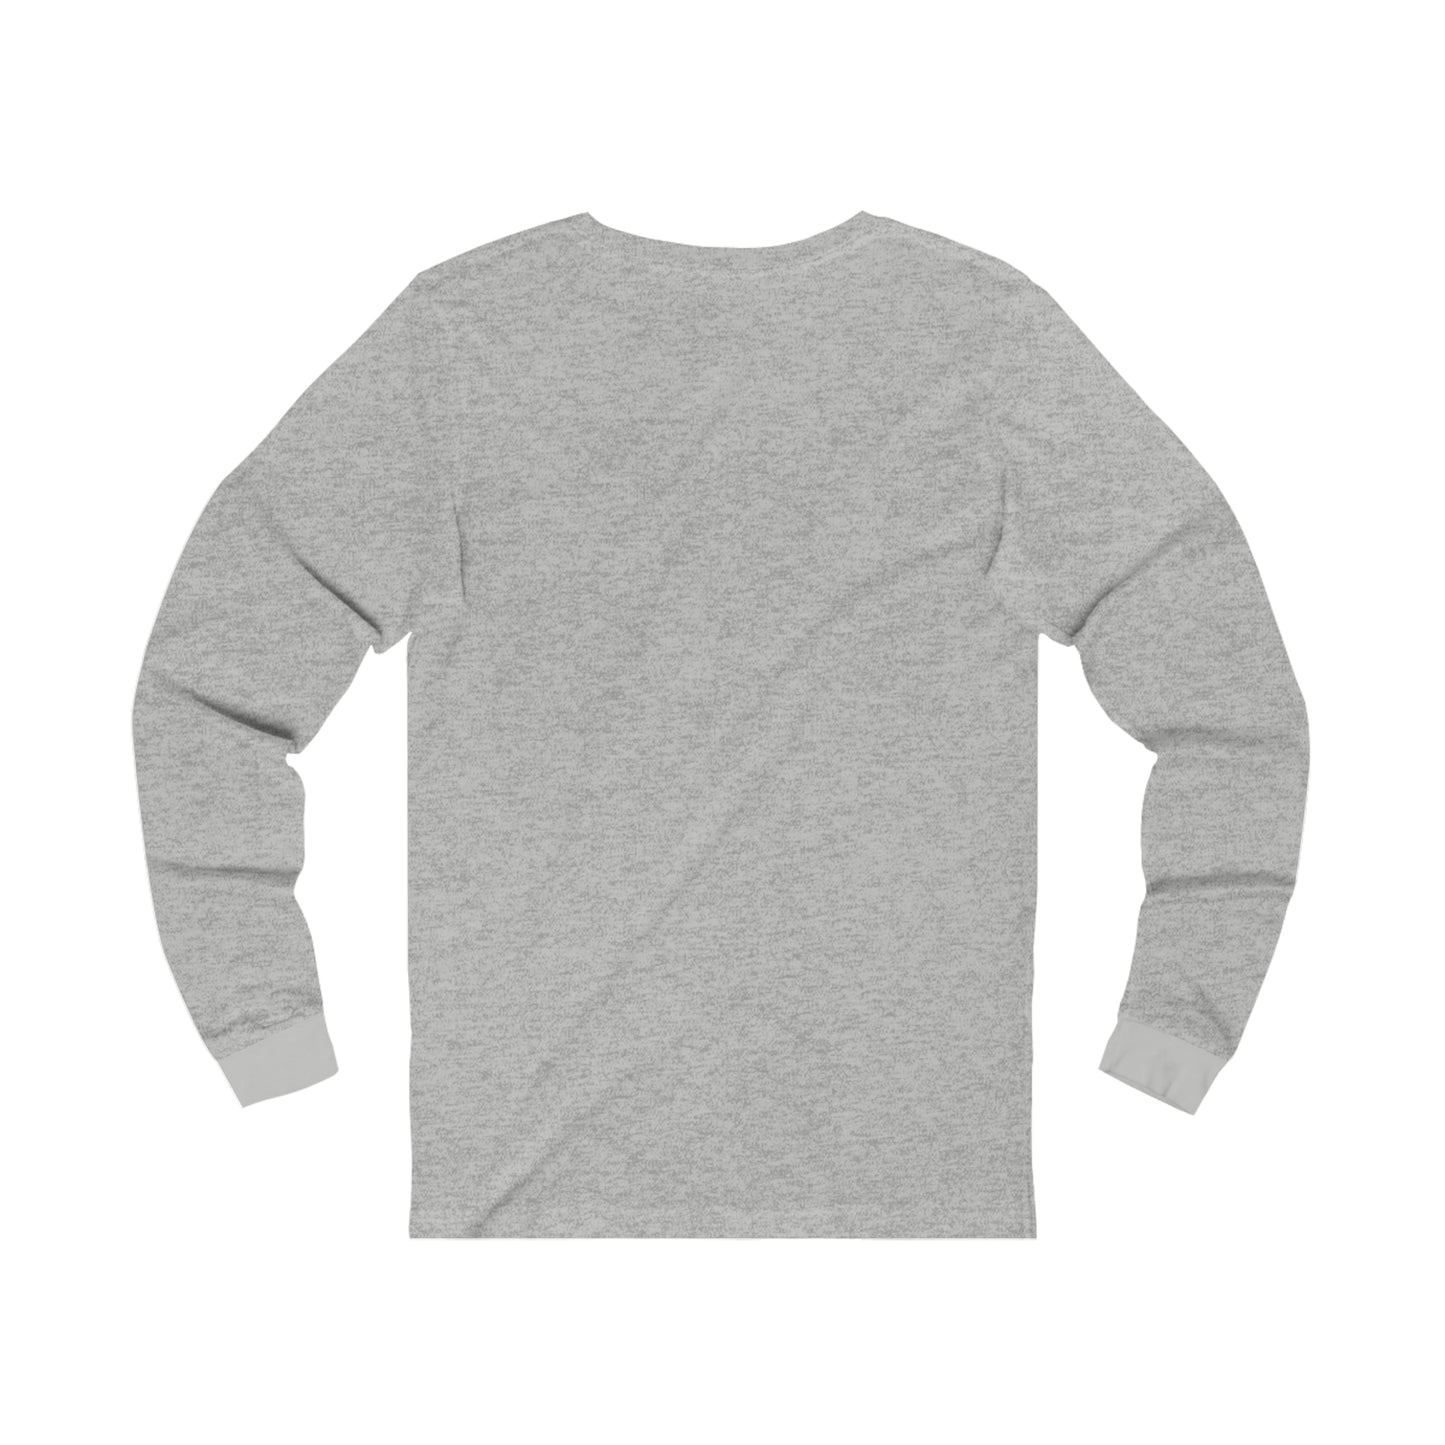 A plain gray Printify Unisex Jersey Long Sleeve Signature Logo Tee displayed on a white background, showing the back view of the shirt. The shirt, inspired by Toronto's Cabbagetown style, has a round neckline and standard fit.